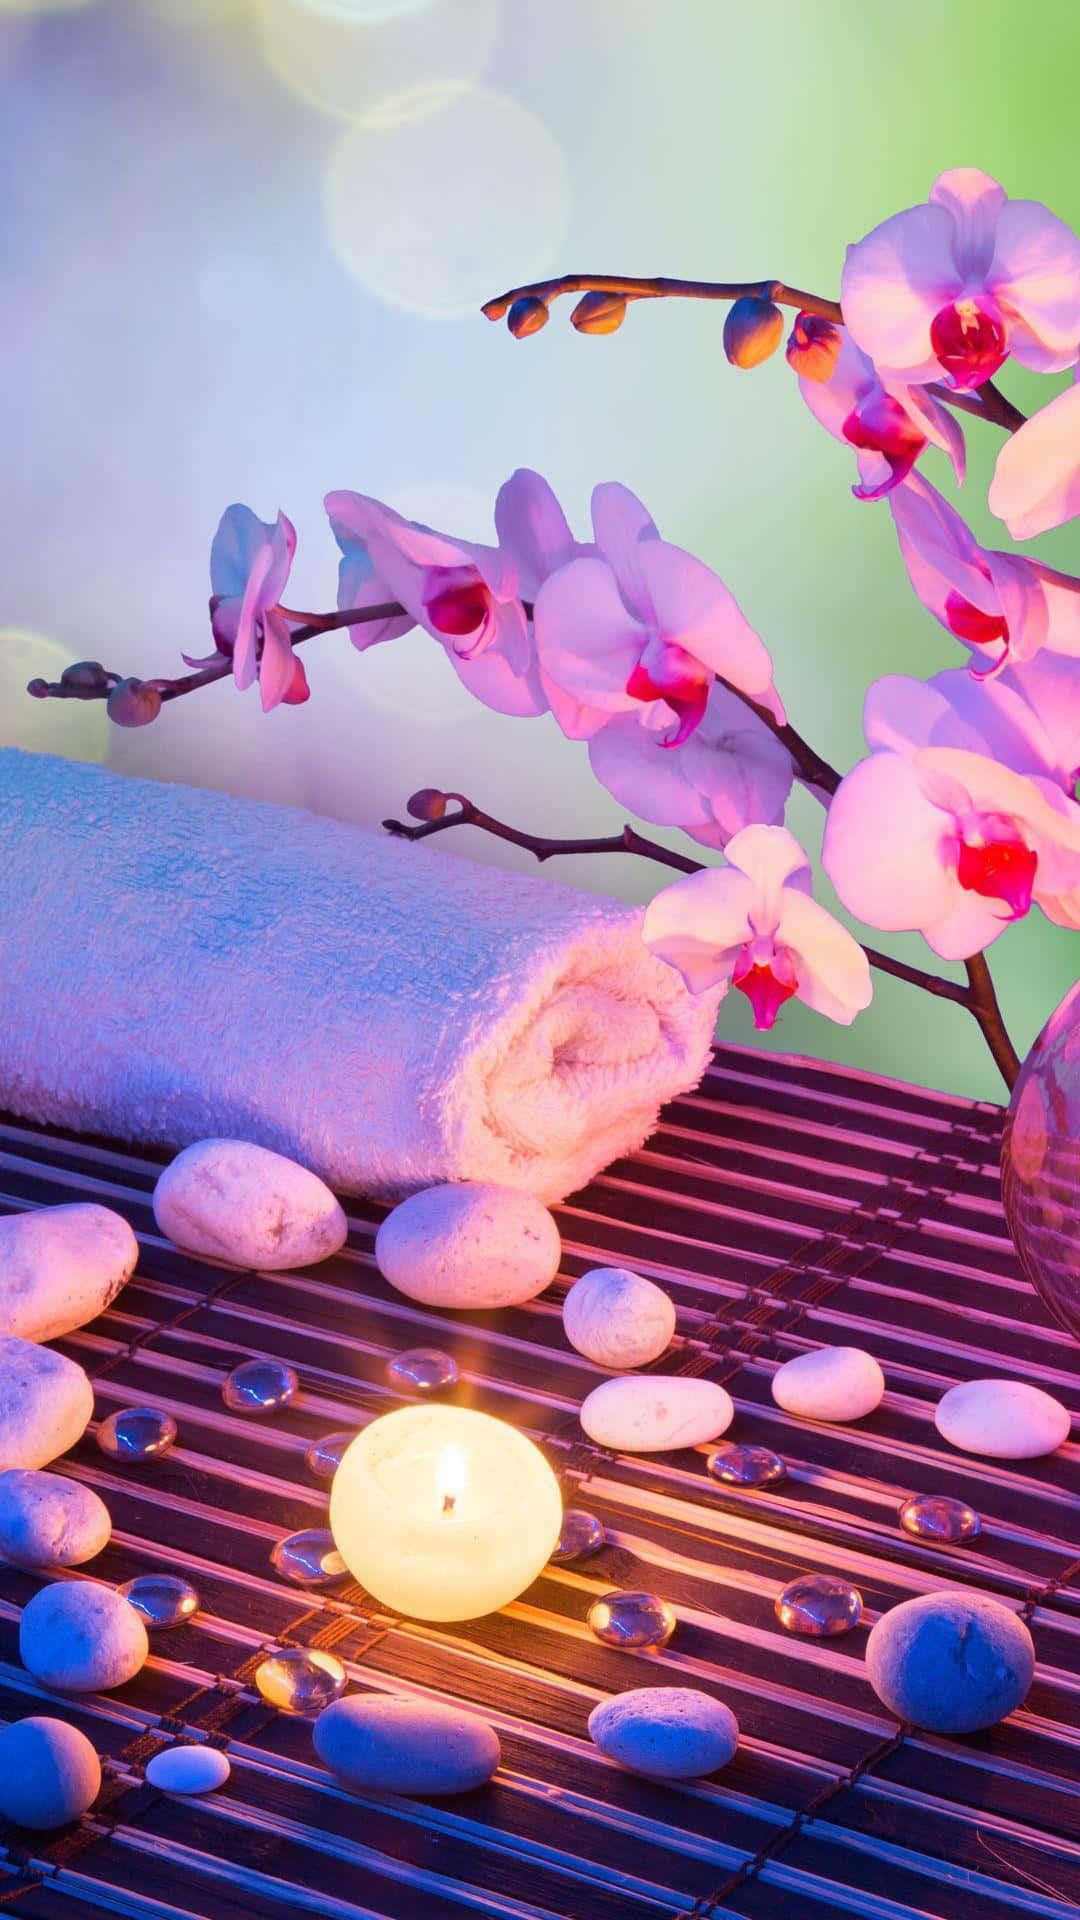 Tranquil Spa Settingwith Orchidsand Candle Wallpaper